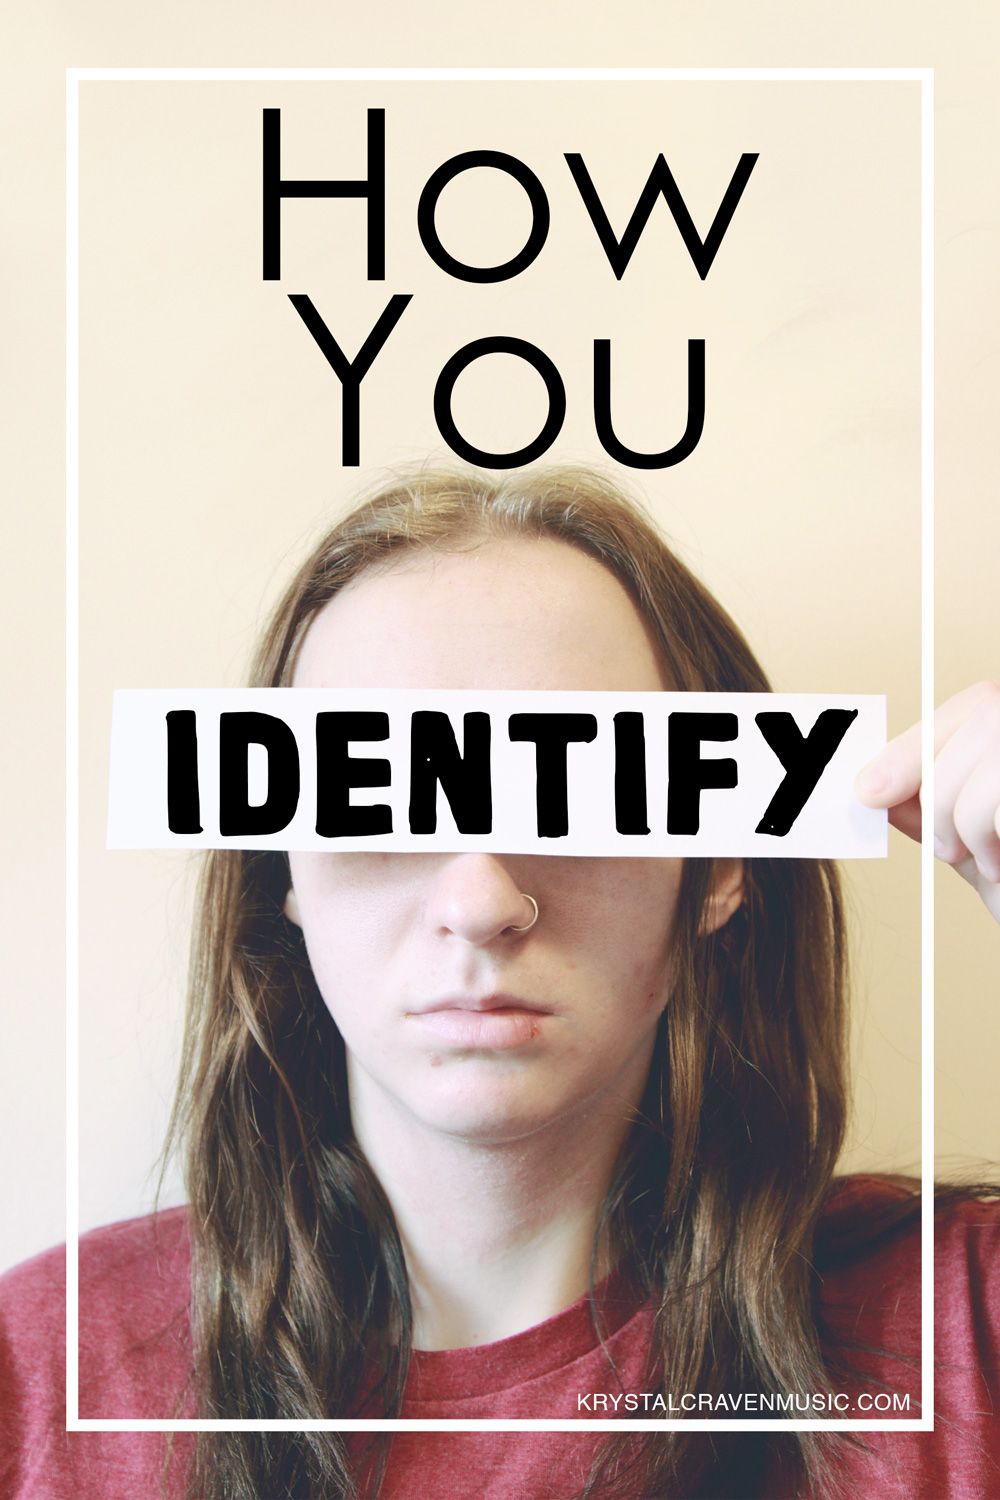 The devotional title text overlaying a person with a red shirt and long hair, holding a white strip of paper over their eyes. The words "How You" are to the left of the person and the word "Identify" is over the white strip of paper.